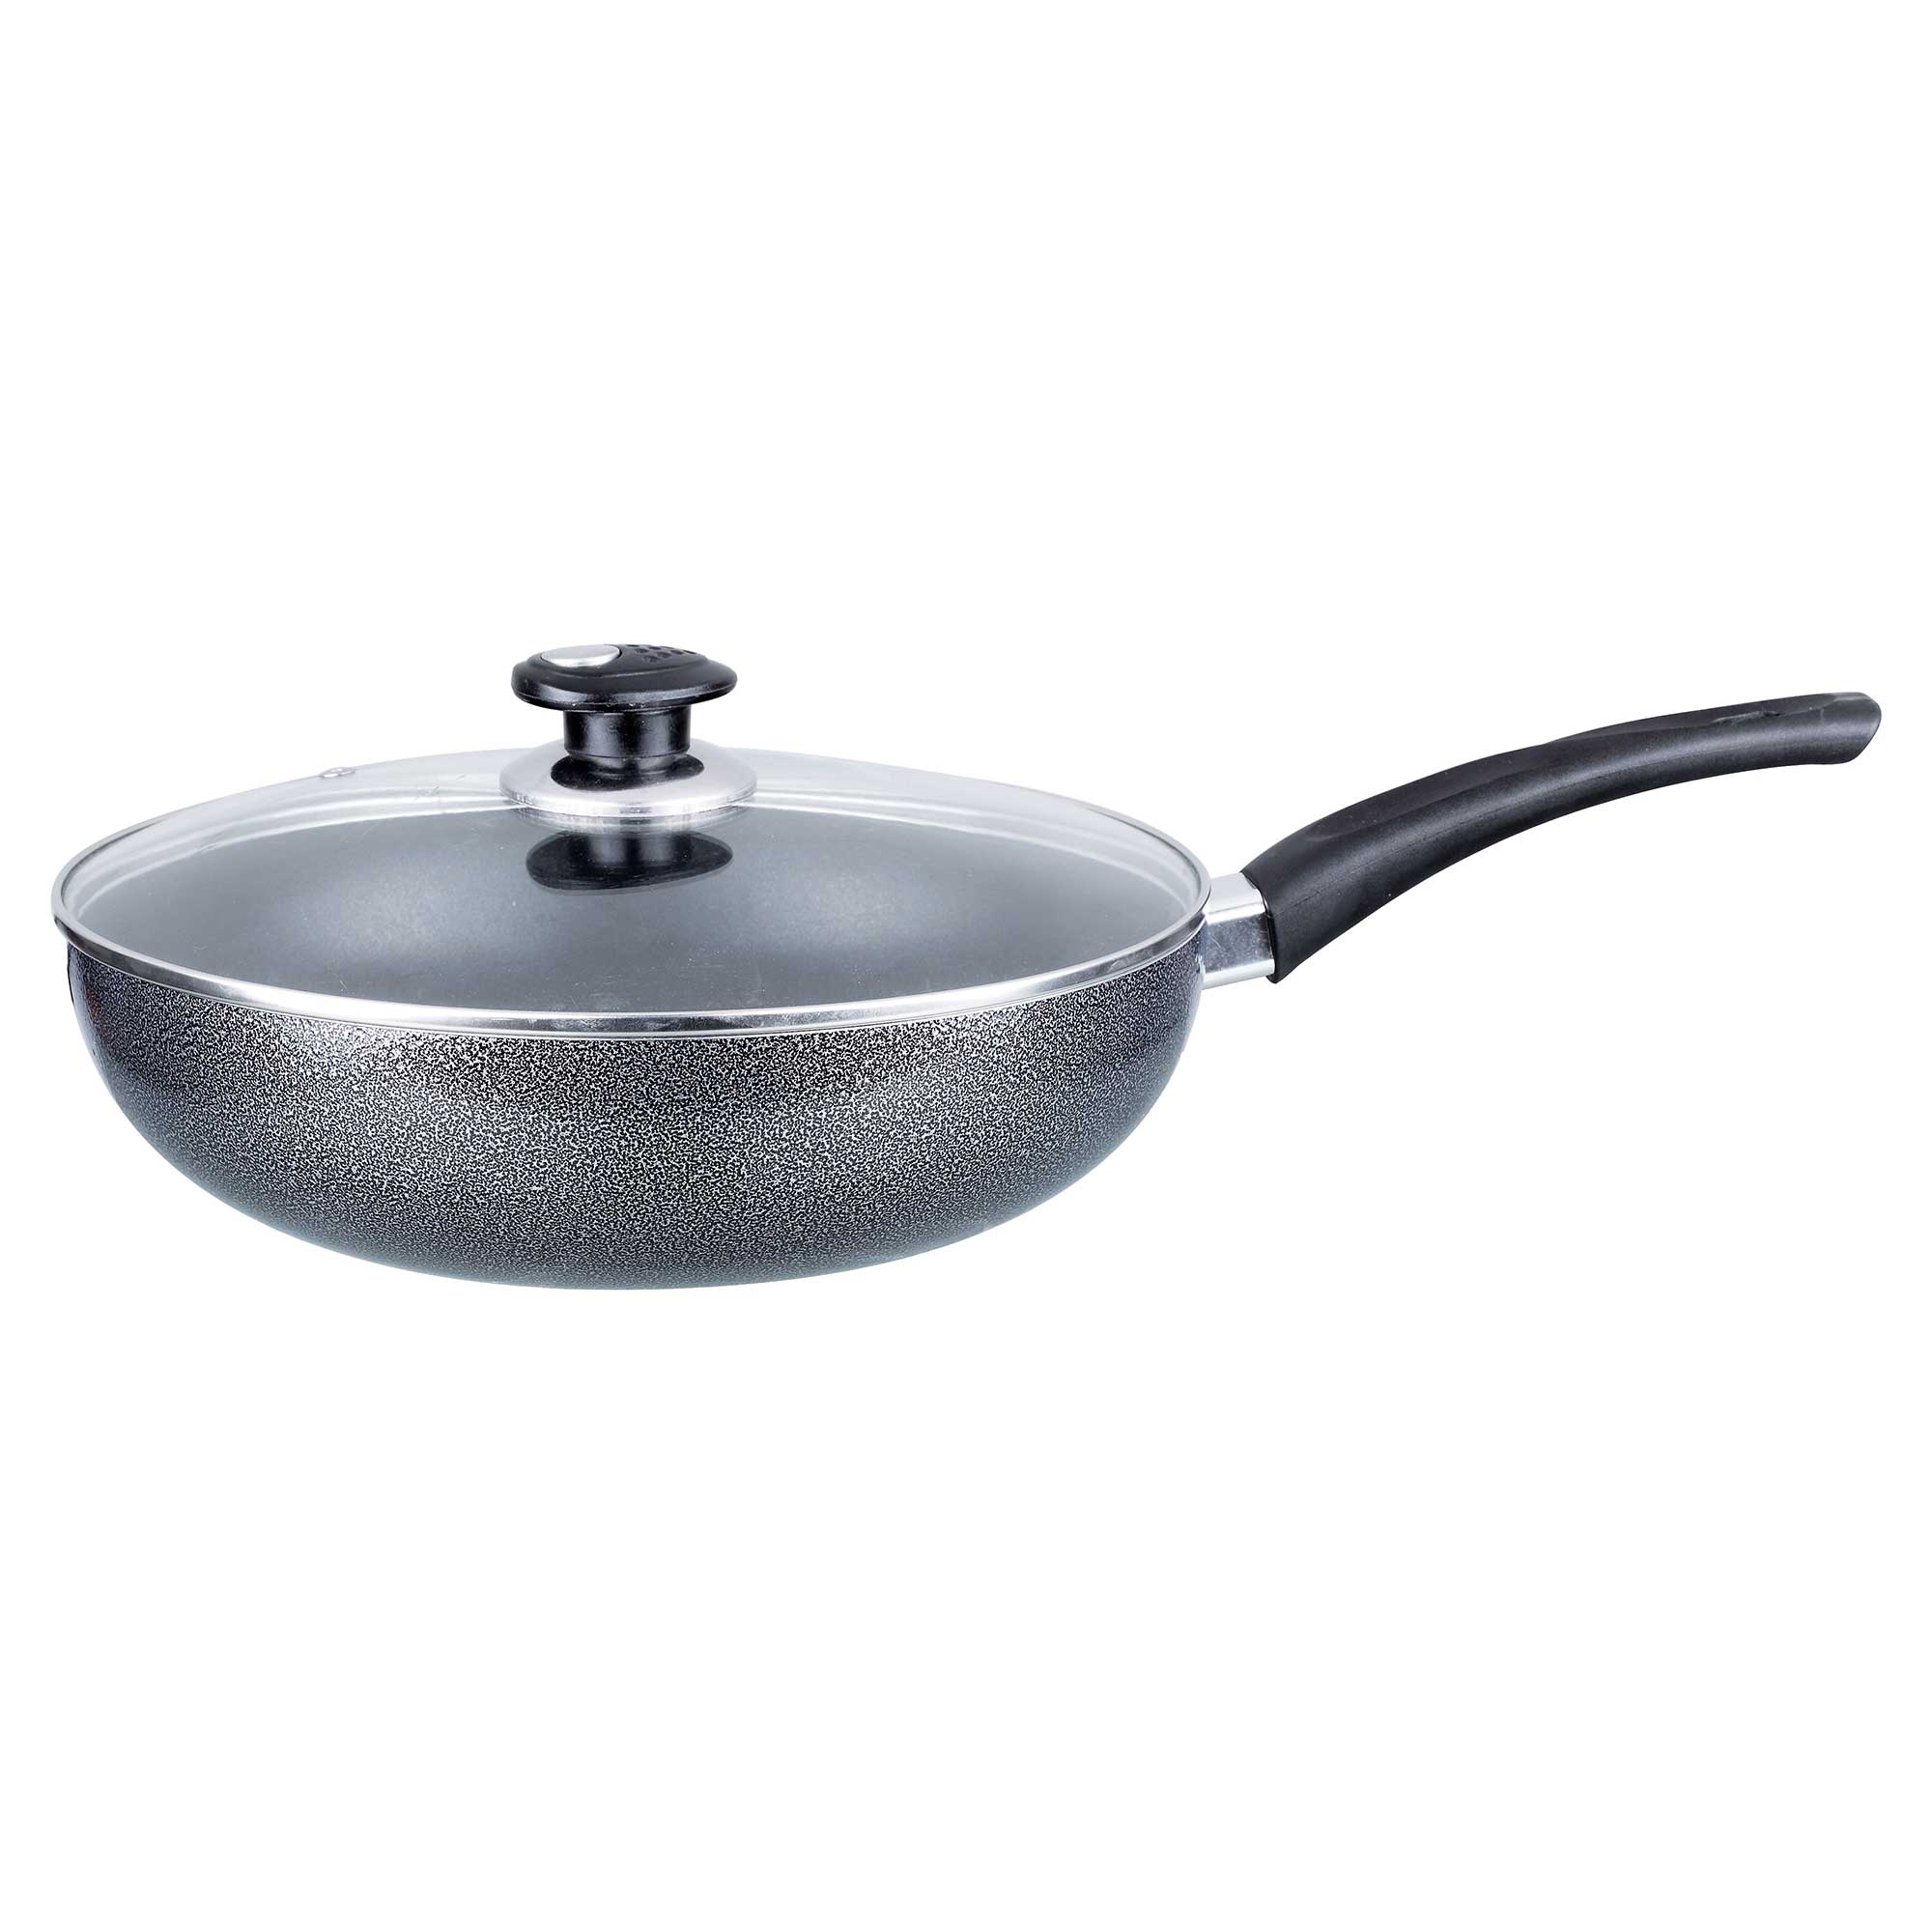 Brentwood BWL-407 11-inch Aluminum Non-Stick Wok with Lid